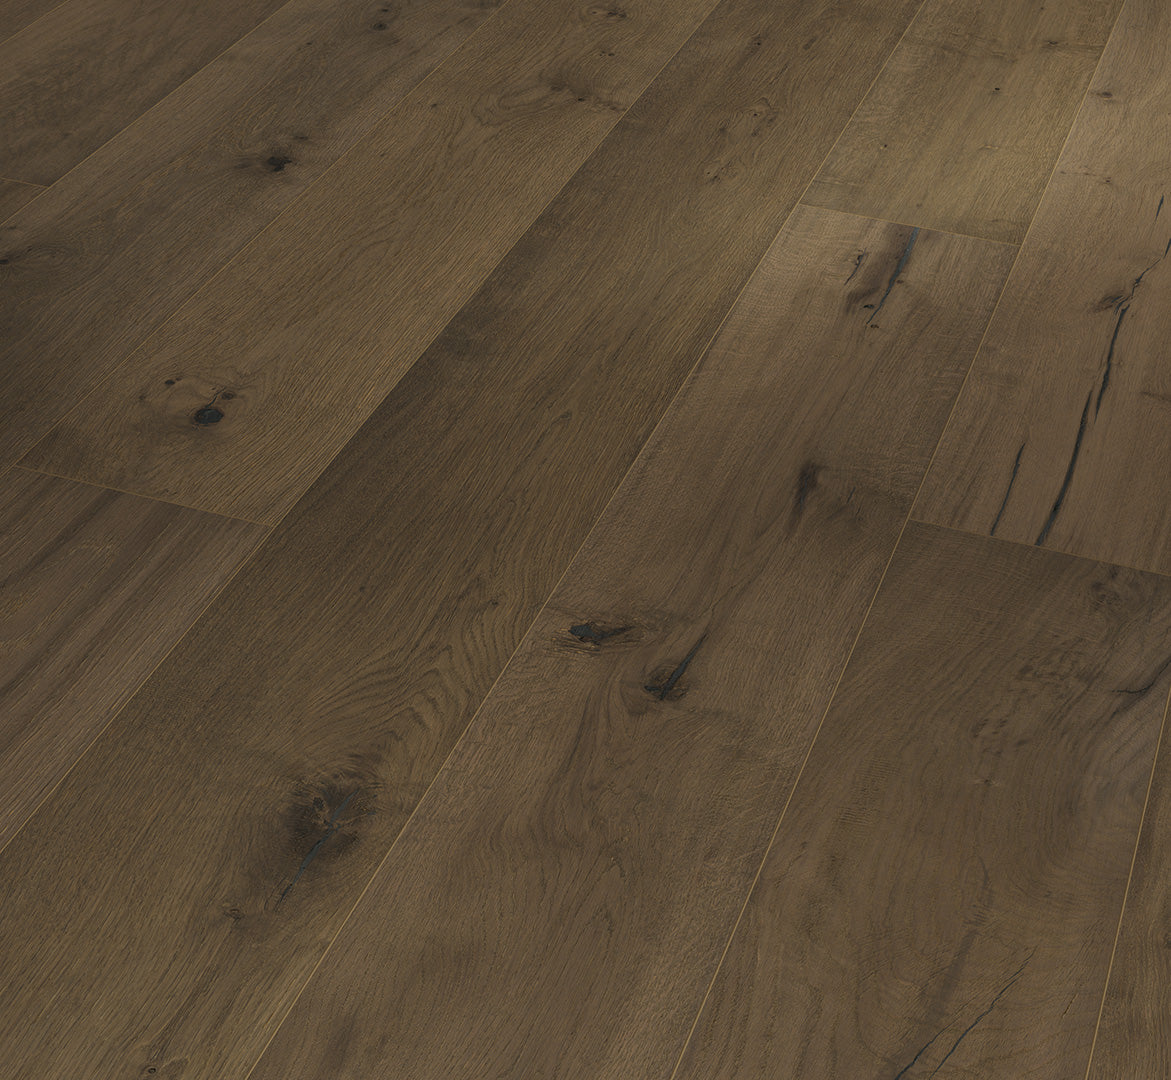 Oak Smoked Grey Handcrafted Trendtime 8 Wide Plank Natural Oils (1882 x 190 x 15/4mm)